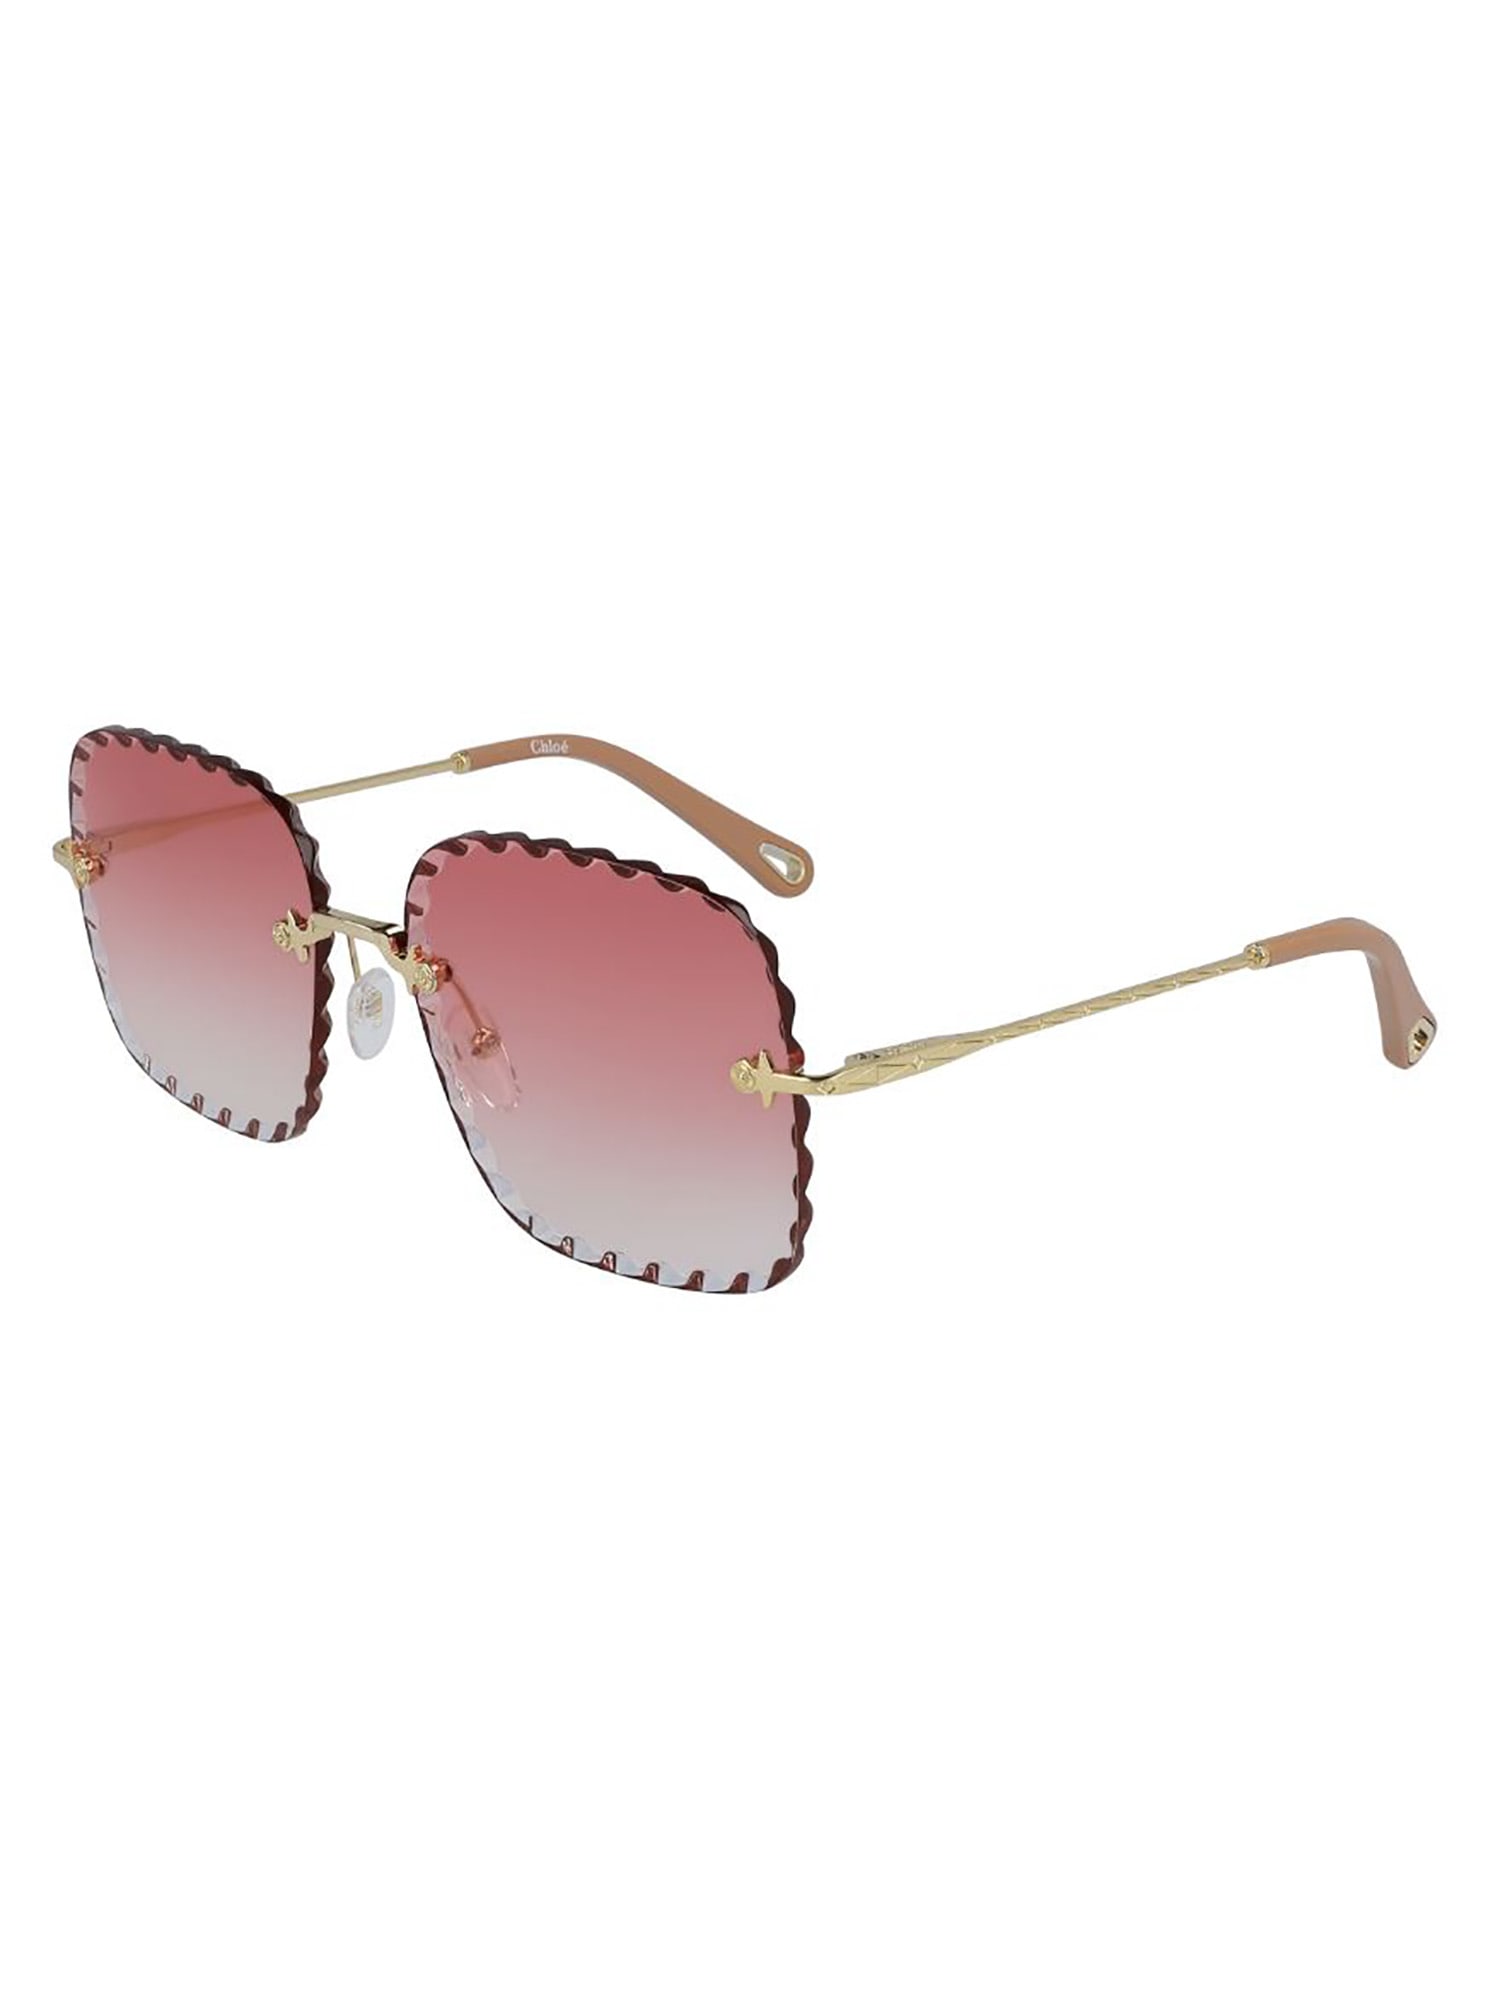 Chloé Ce161s 41545 Sunglasses In Gold Gadient Coral